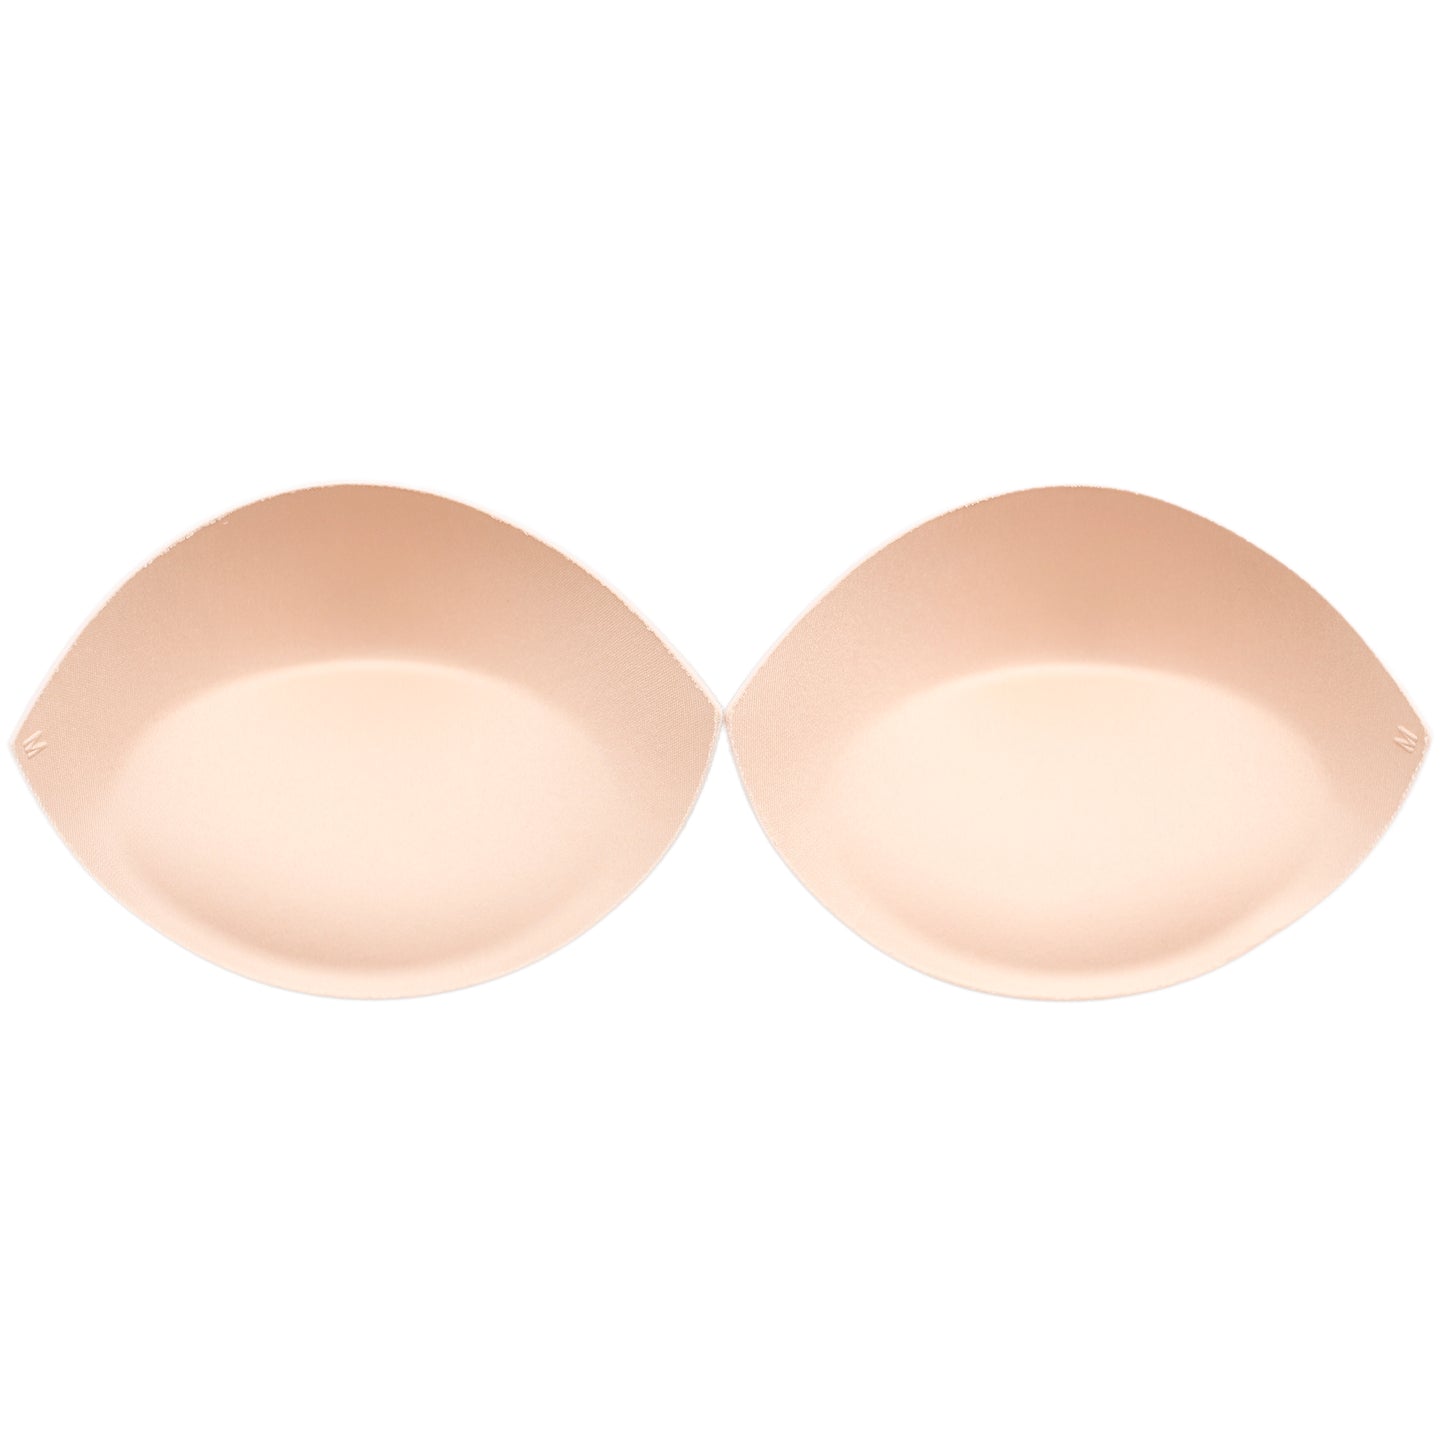 FIRM SOFT-TOUCH PUSH UP BRA CUP NEUTRAL/ NUDE